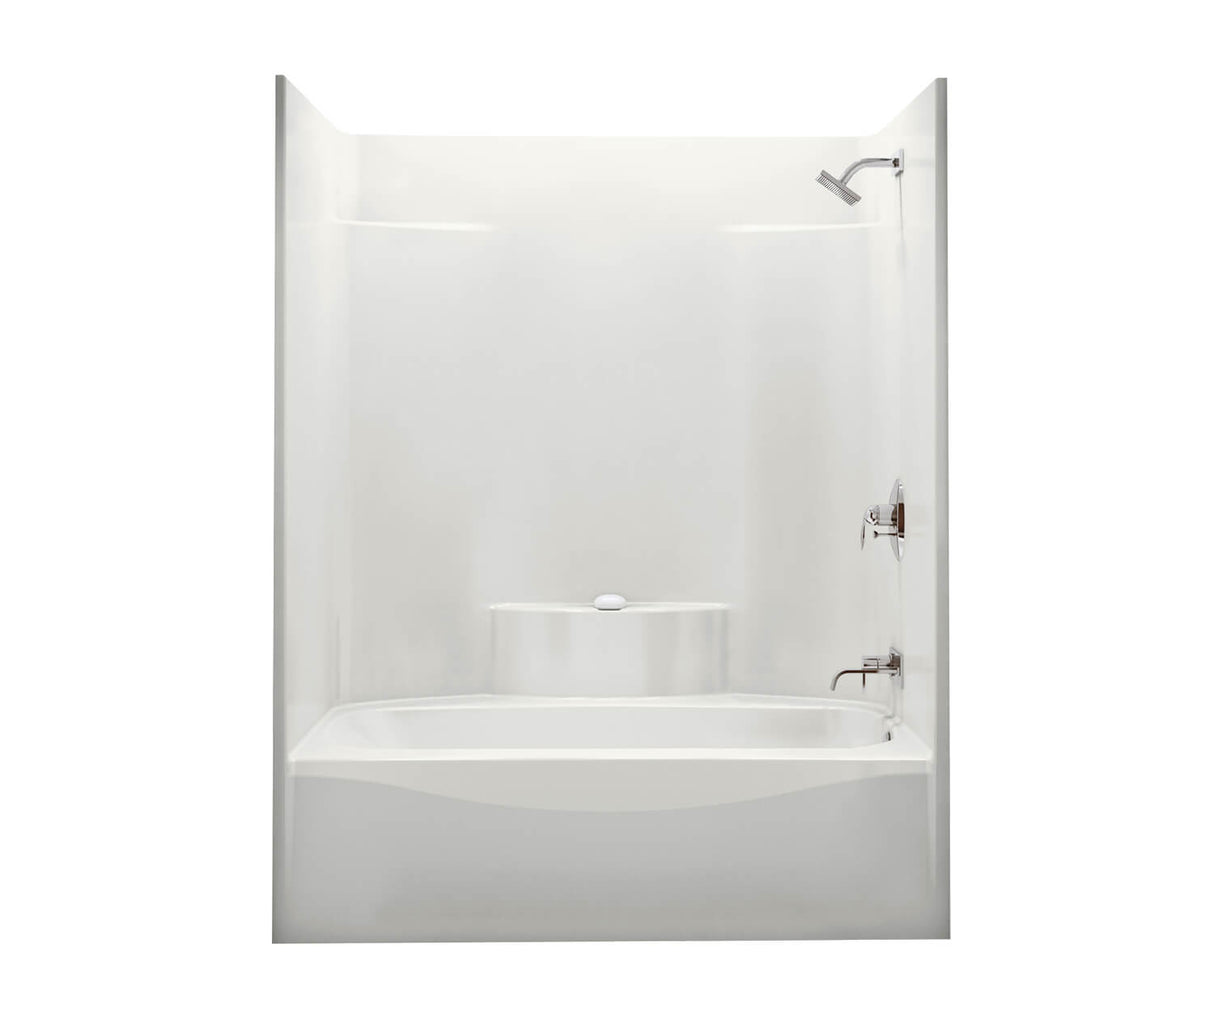 Aker TS-3660 AcrylX Alcove Right-Hand Drain One-Piece Tub Shower in White